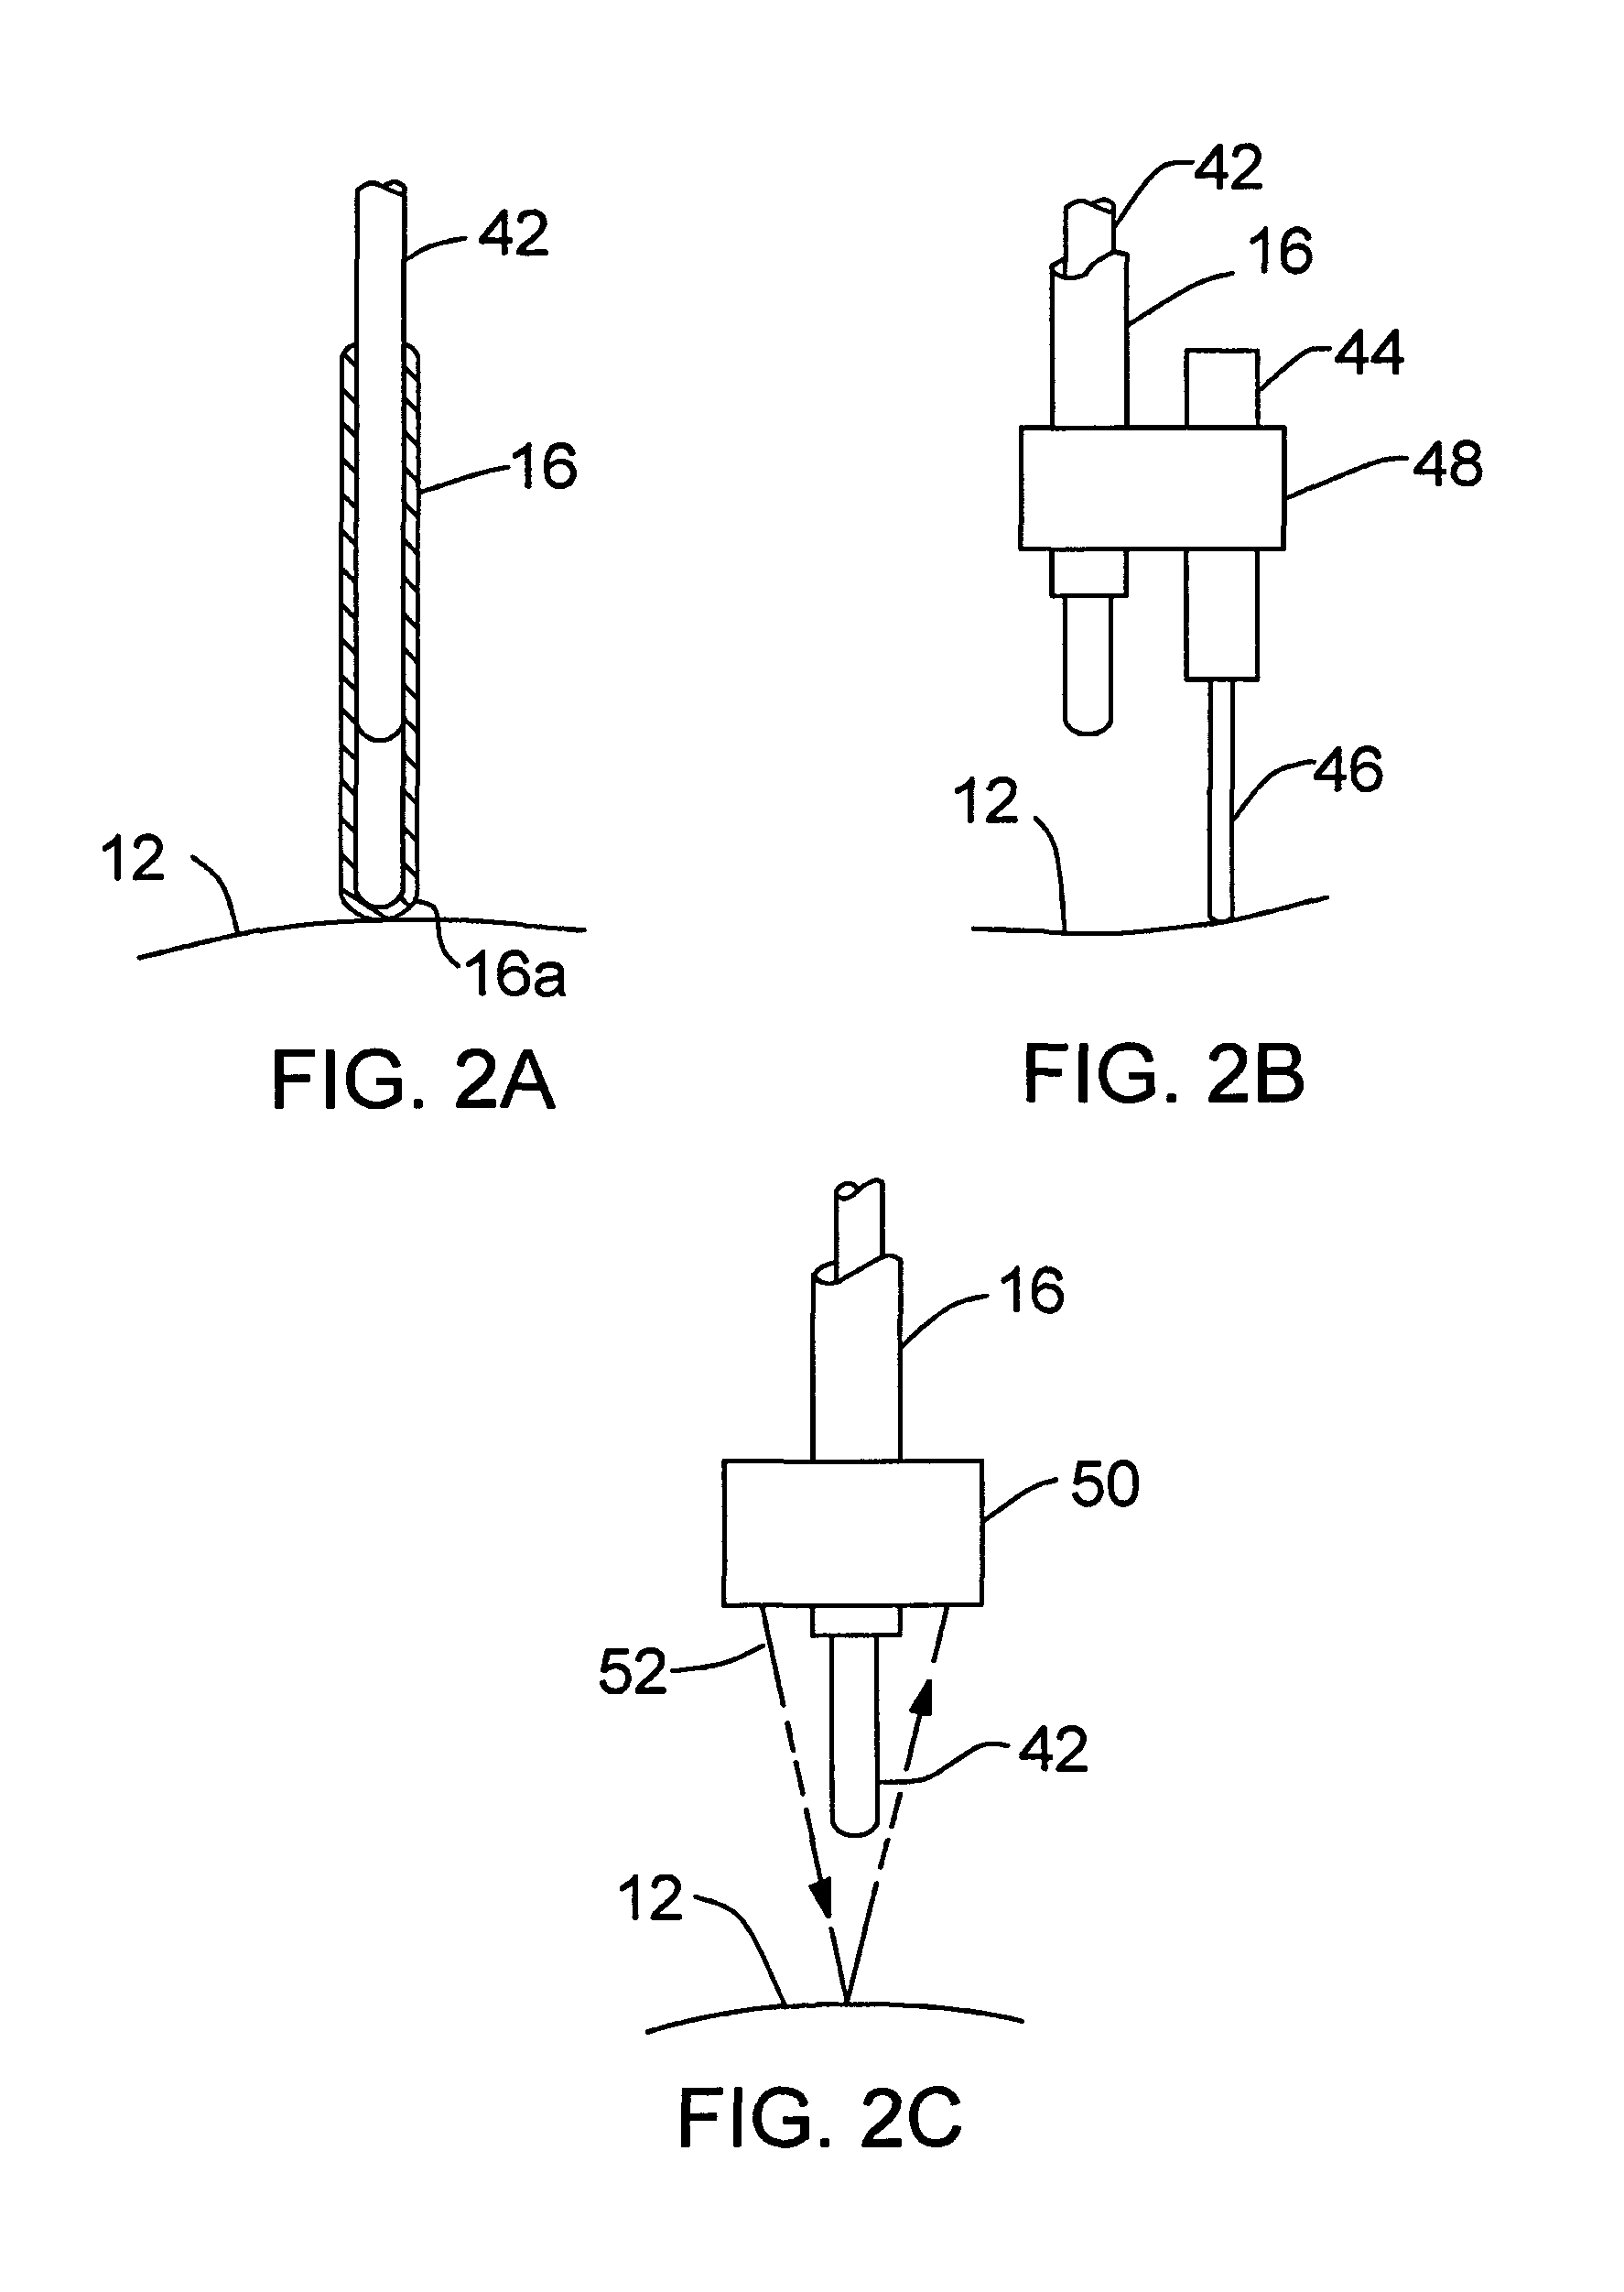 Apparatus and methods for radiation treatment of tissue surfaces